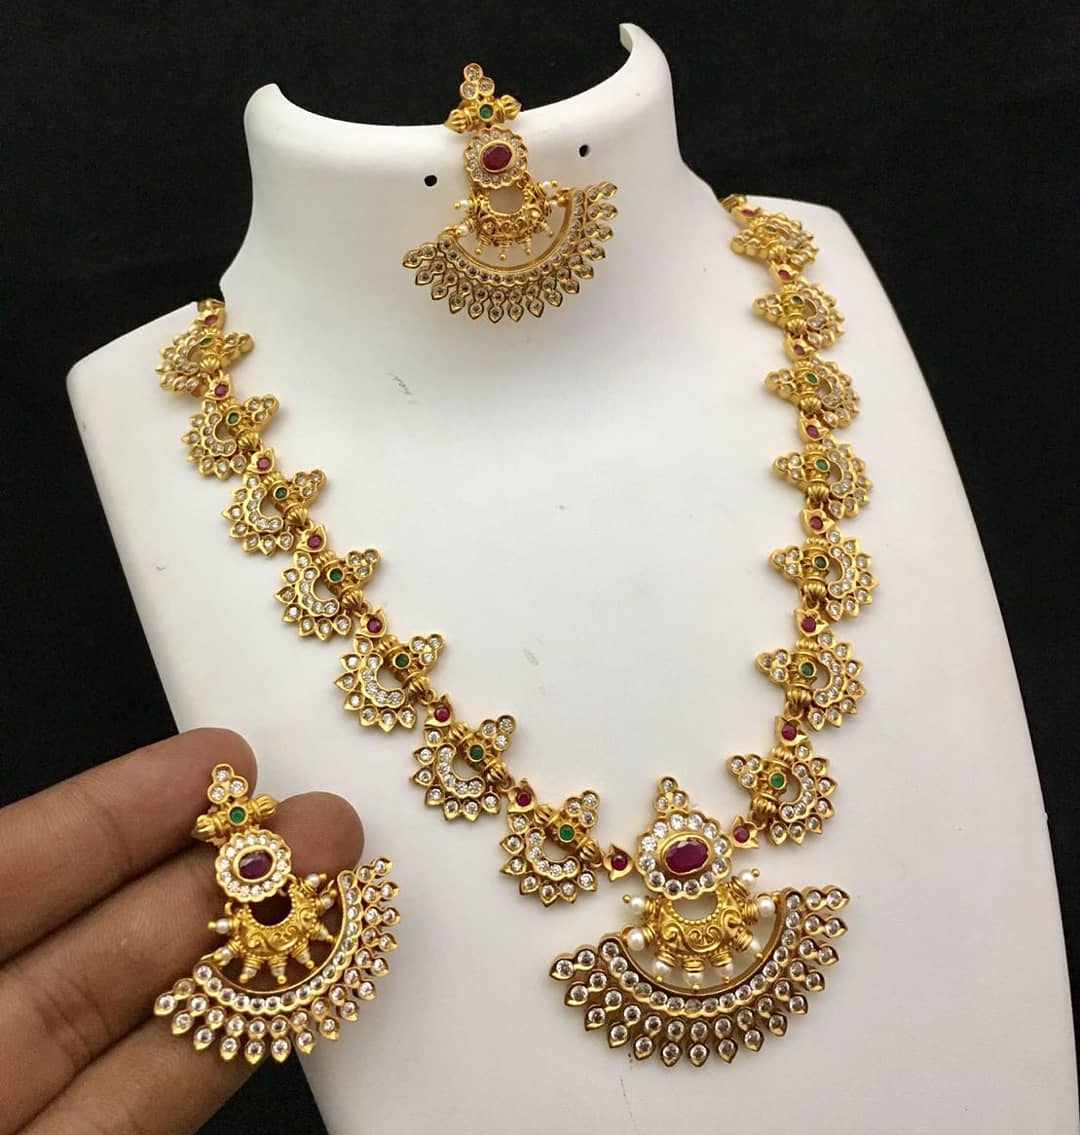 Pretty Stone Long Necklace From Kruthika Jewellery